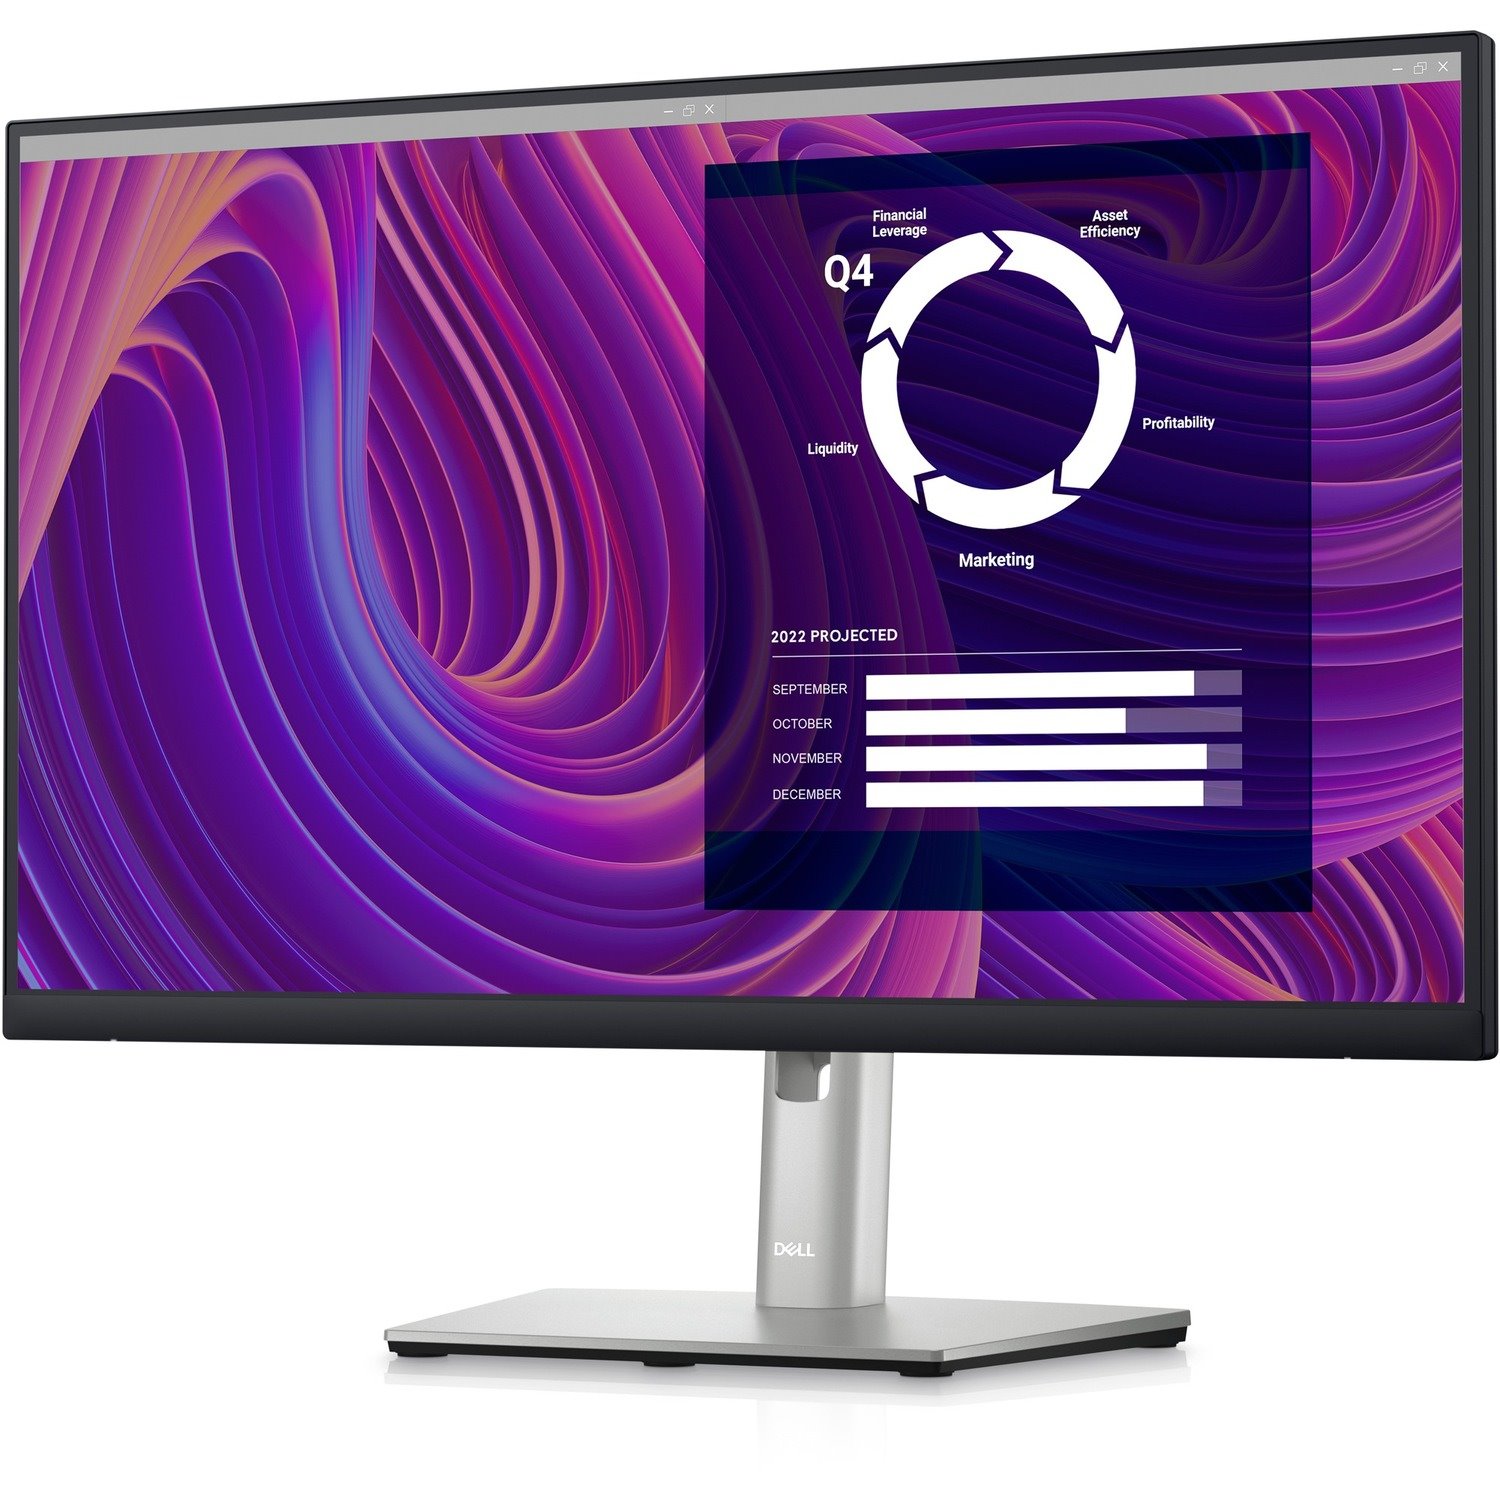 Dell P2423D 23.8" QHD WLED LCD Monitor - 16:9 - Black, Silver